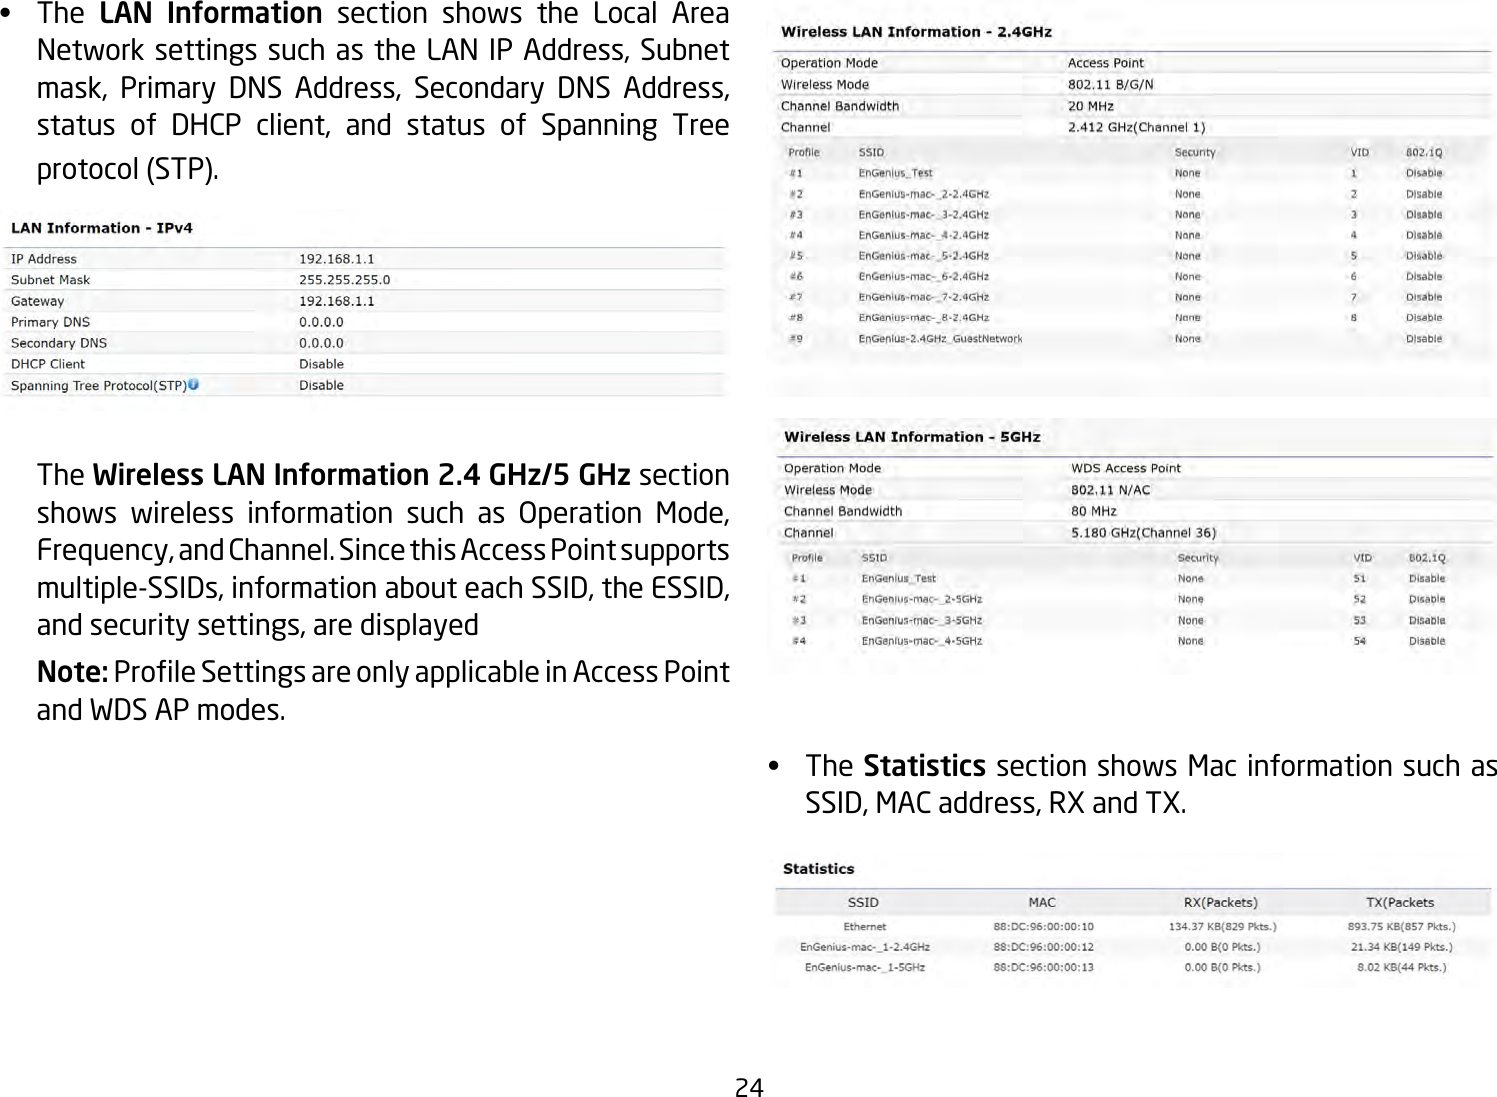 24•   The LAN Information section shows the Local Area Network settings such as the LAN IP Address, Subnet mask, Primary DNS Address, Secondary DNS Address, status of DHCP client, and status of Spanning Tree protocol (STP).   The Wireless LAN Information 2.4 GHz/5 GHz section shows wireless information such as Operation Mode, Frequency, and Channel. Since this Access Point supports multiple-SSIDs, information about each SSID, the ESSID, and security settings, are displayed Note: ProleSettingsareonlyapplicableinAccessPointand WDS AP modes.•   The Statistics section shows Mac information such as SSID, MAC address, RX and TX.